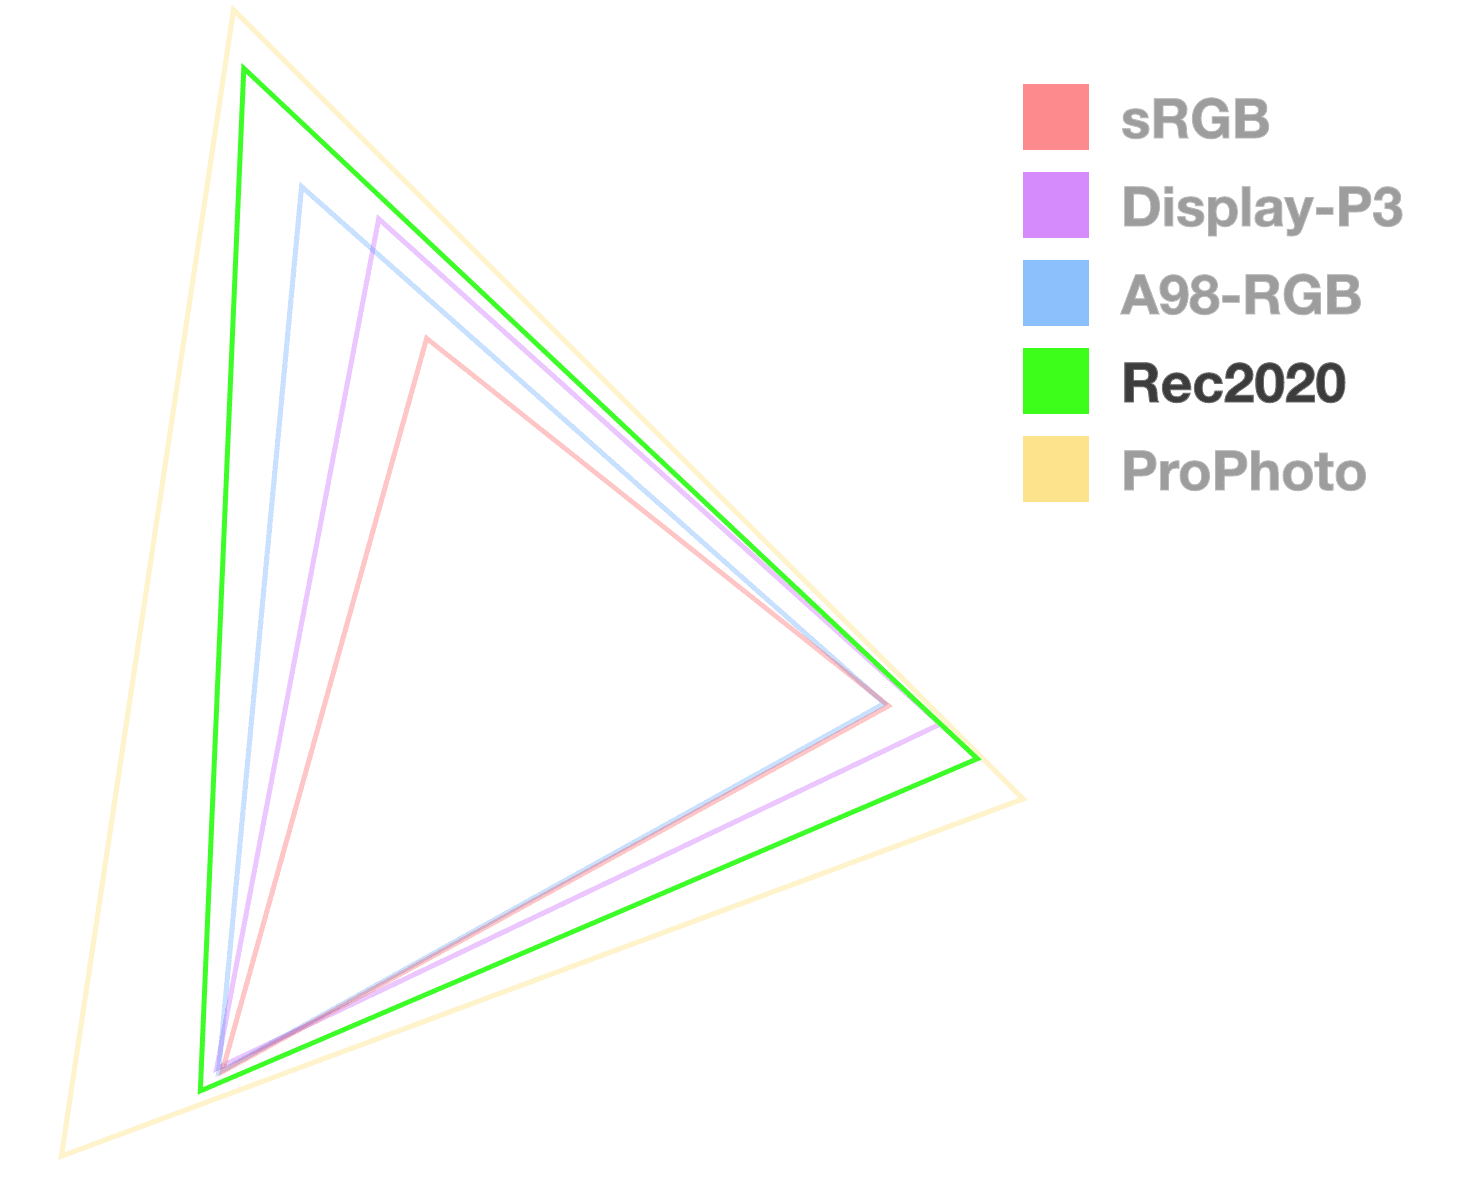 Rec2020 triangle is the only one fully opaque, to help
  visualize the size of the gamut. It looks like 2nd from the largest.